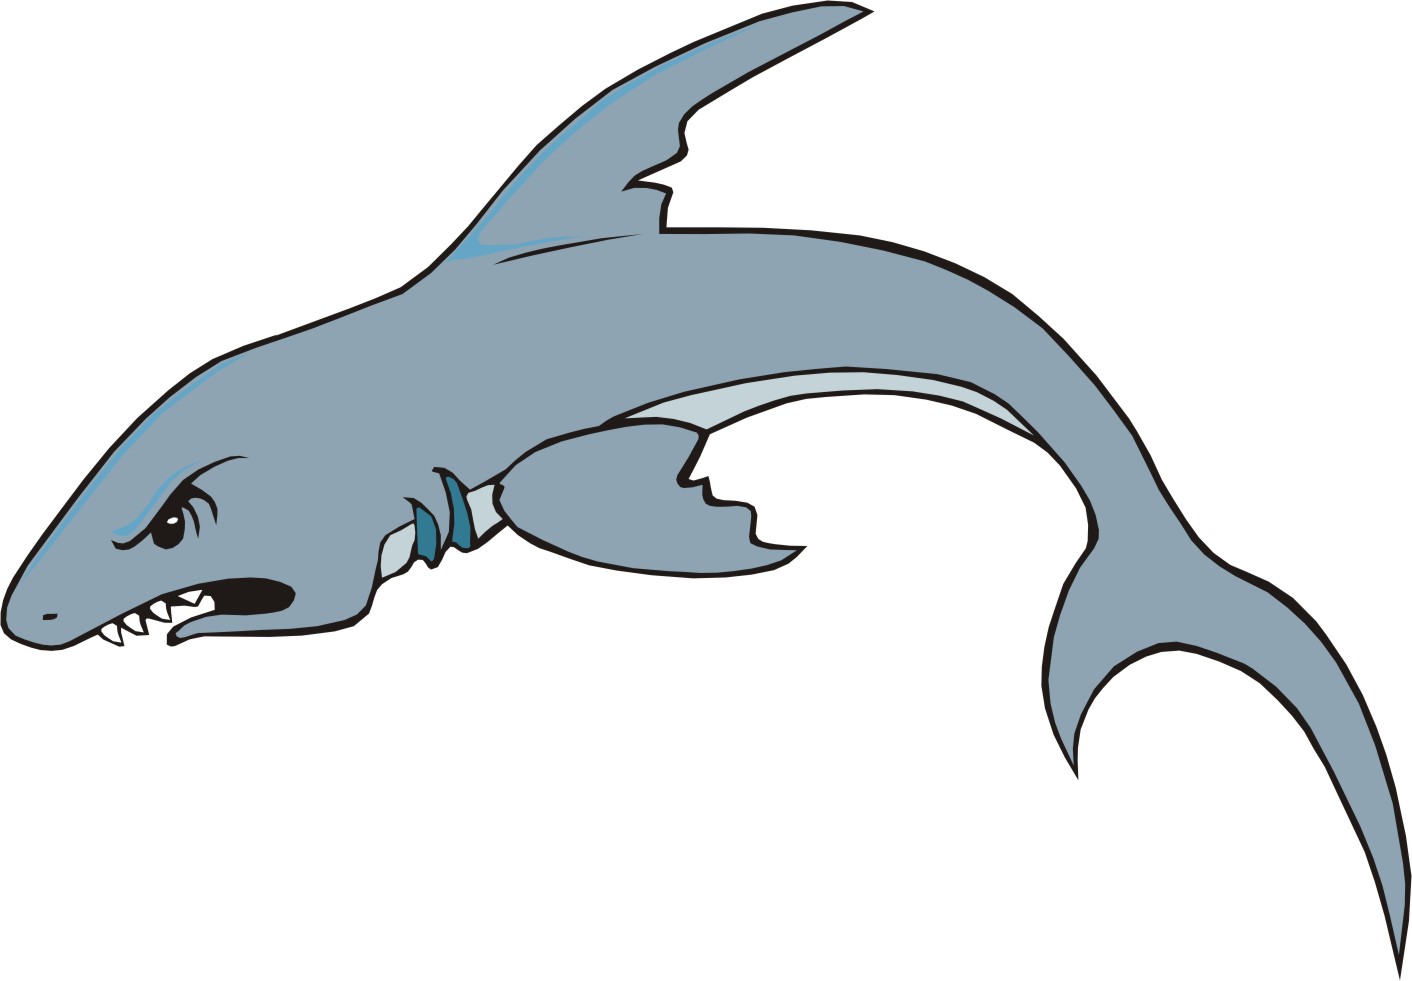 Sharks Cartoon Pictures images